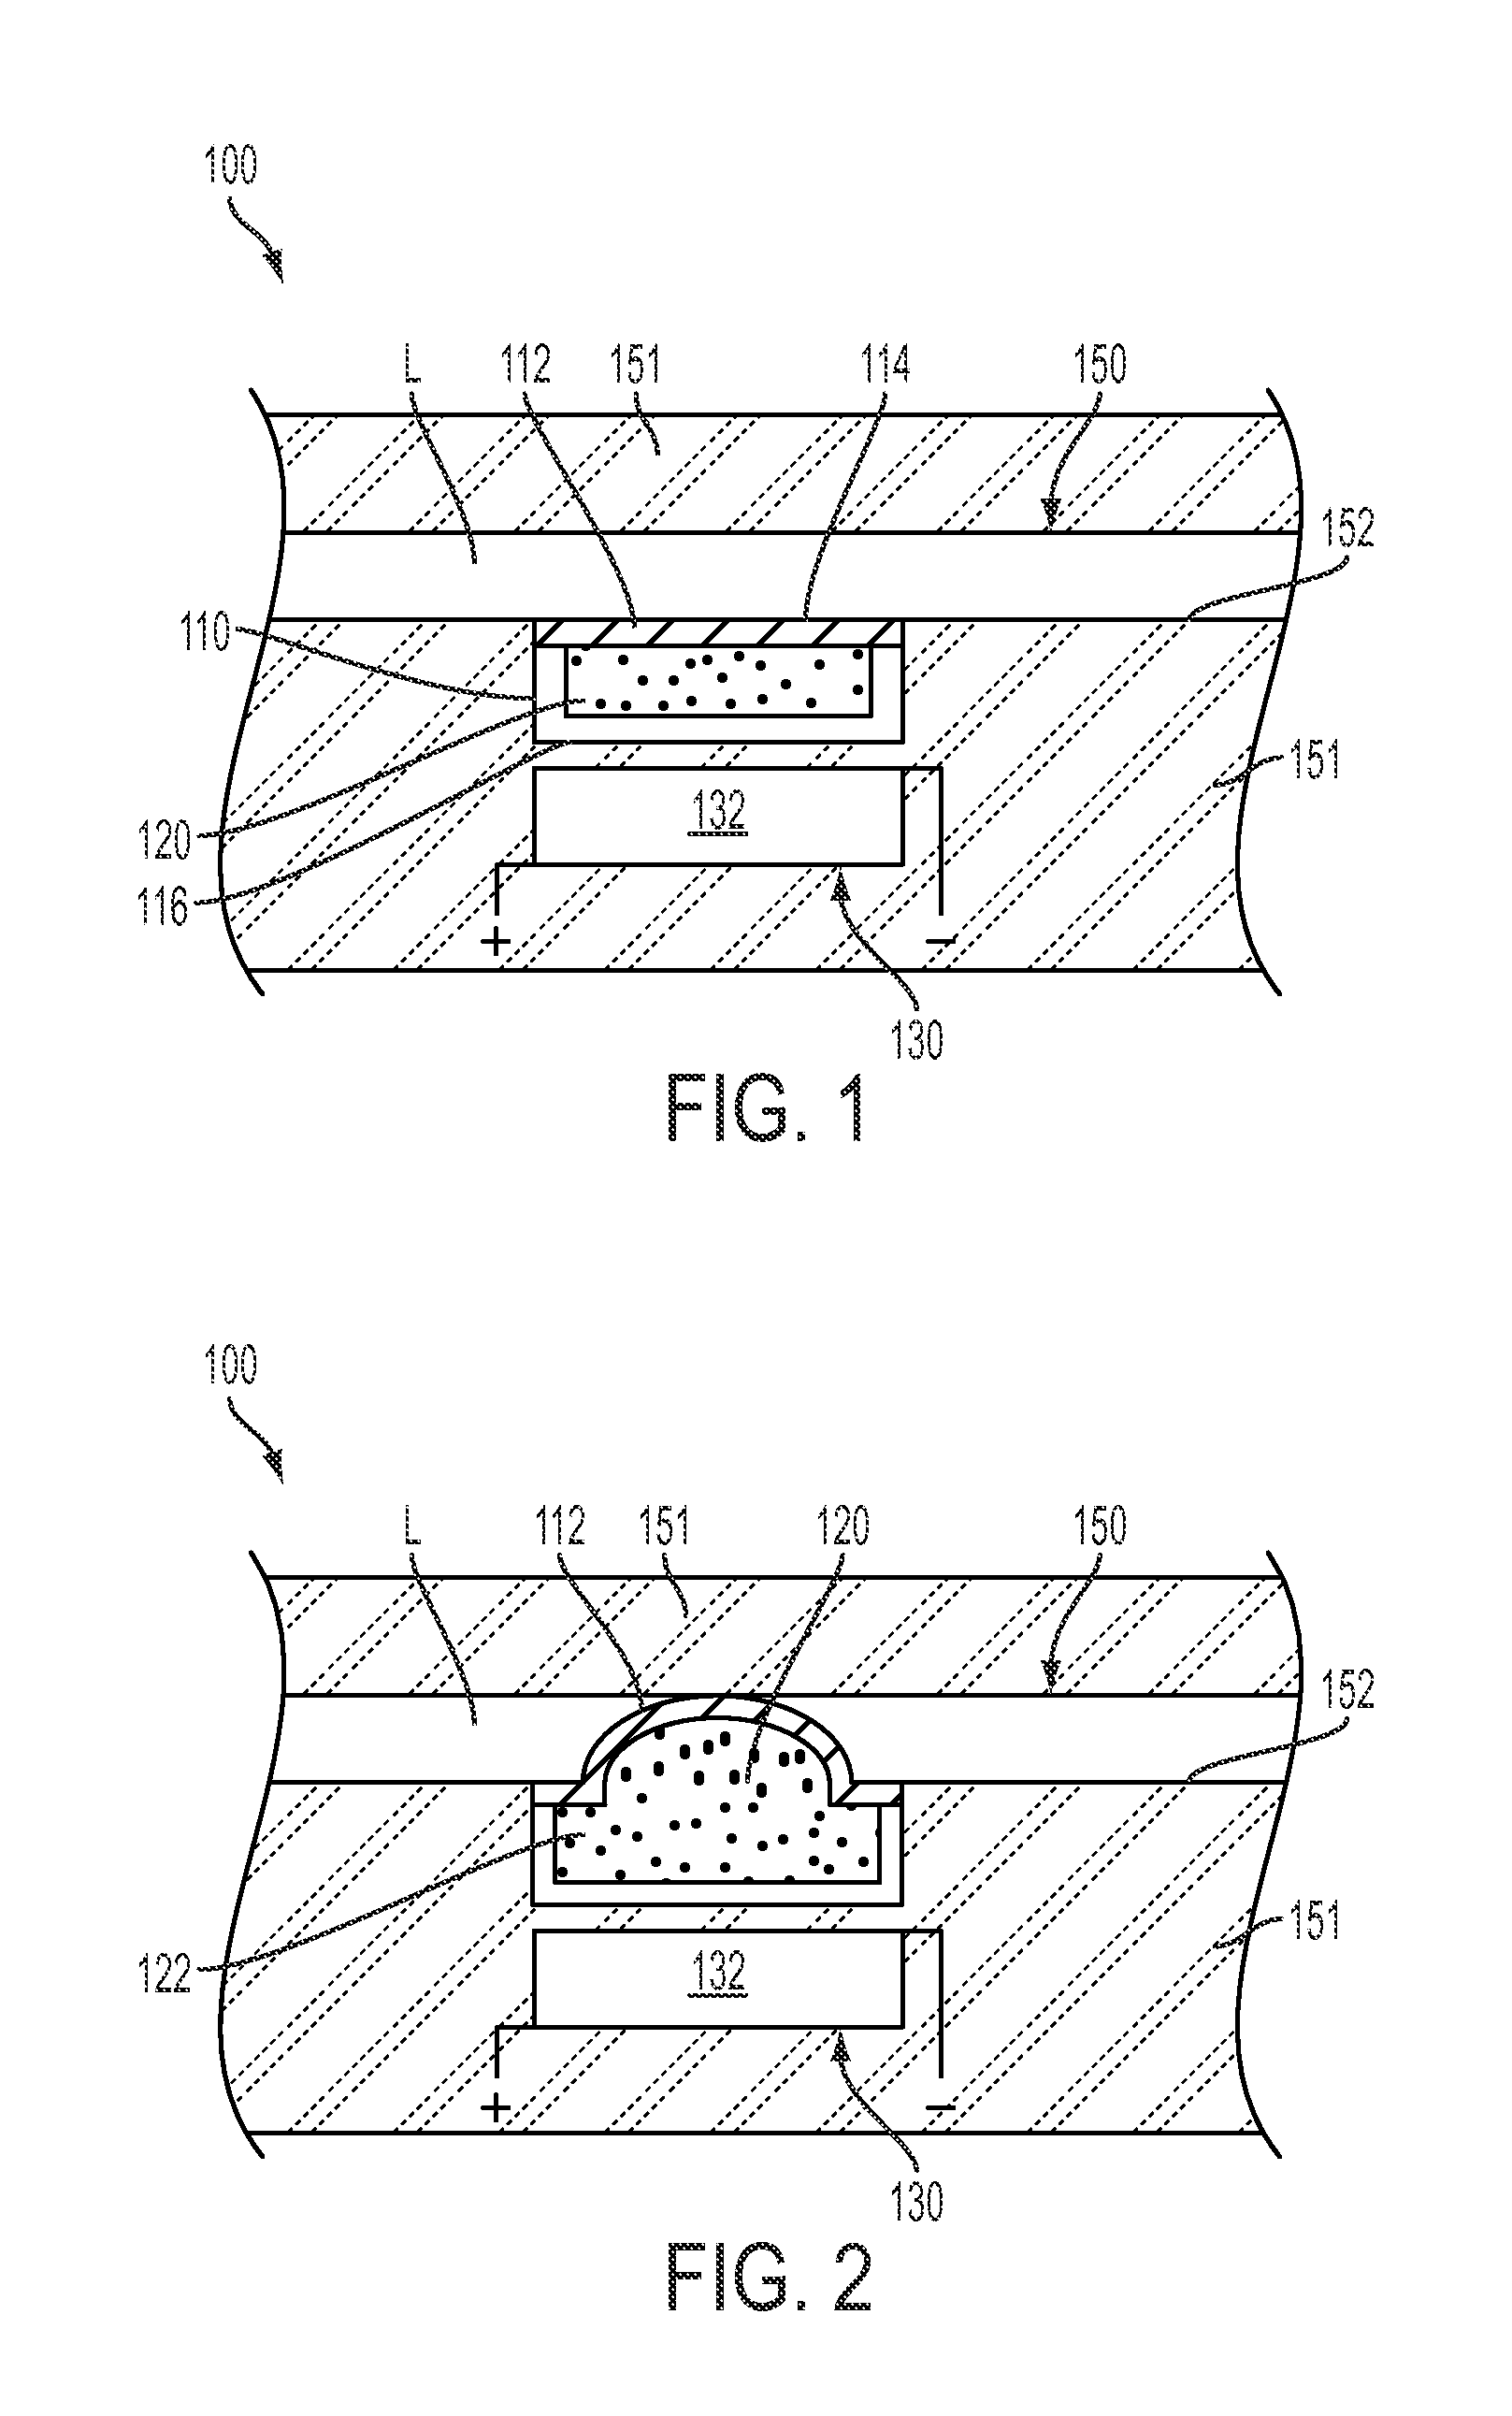 Ferrofluid control and sample collection for microfluidic application